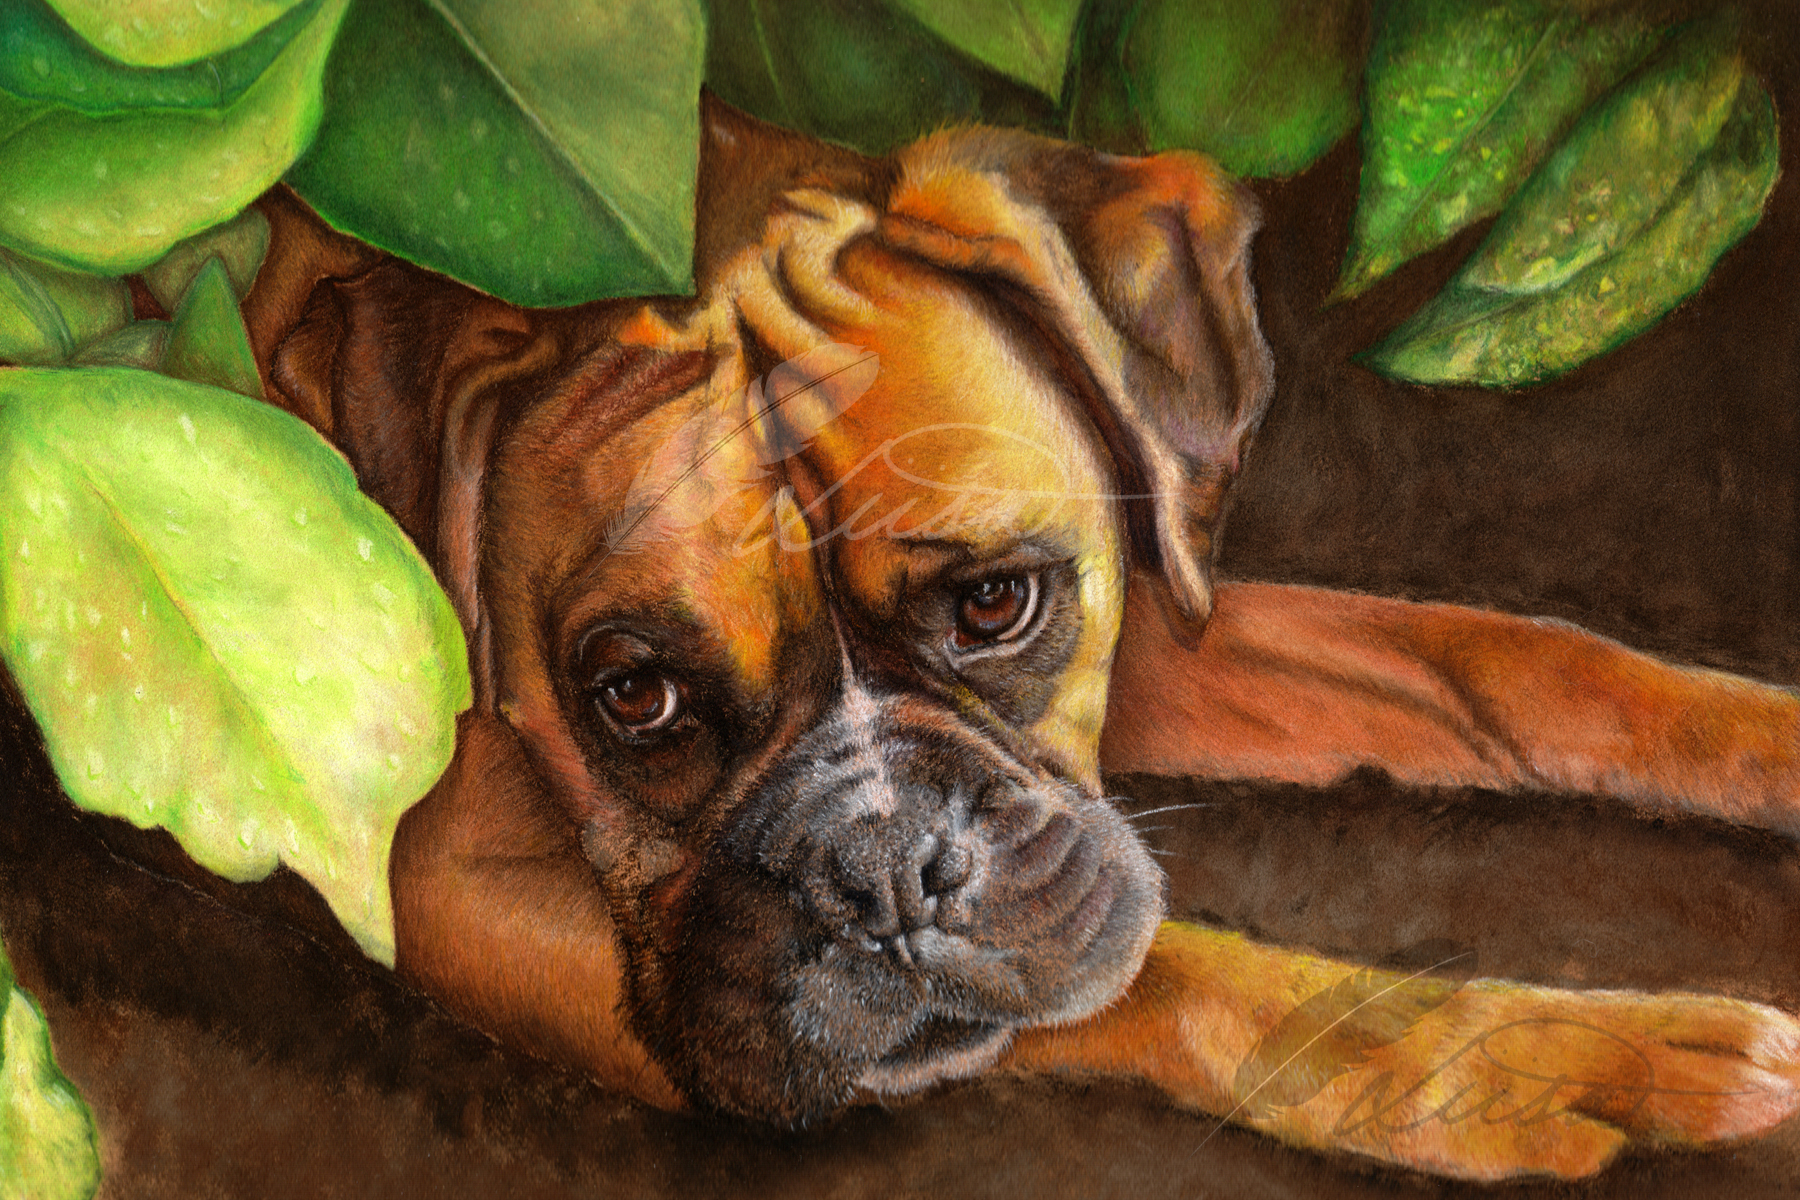 Commission of a Boxer by Liisa Clark